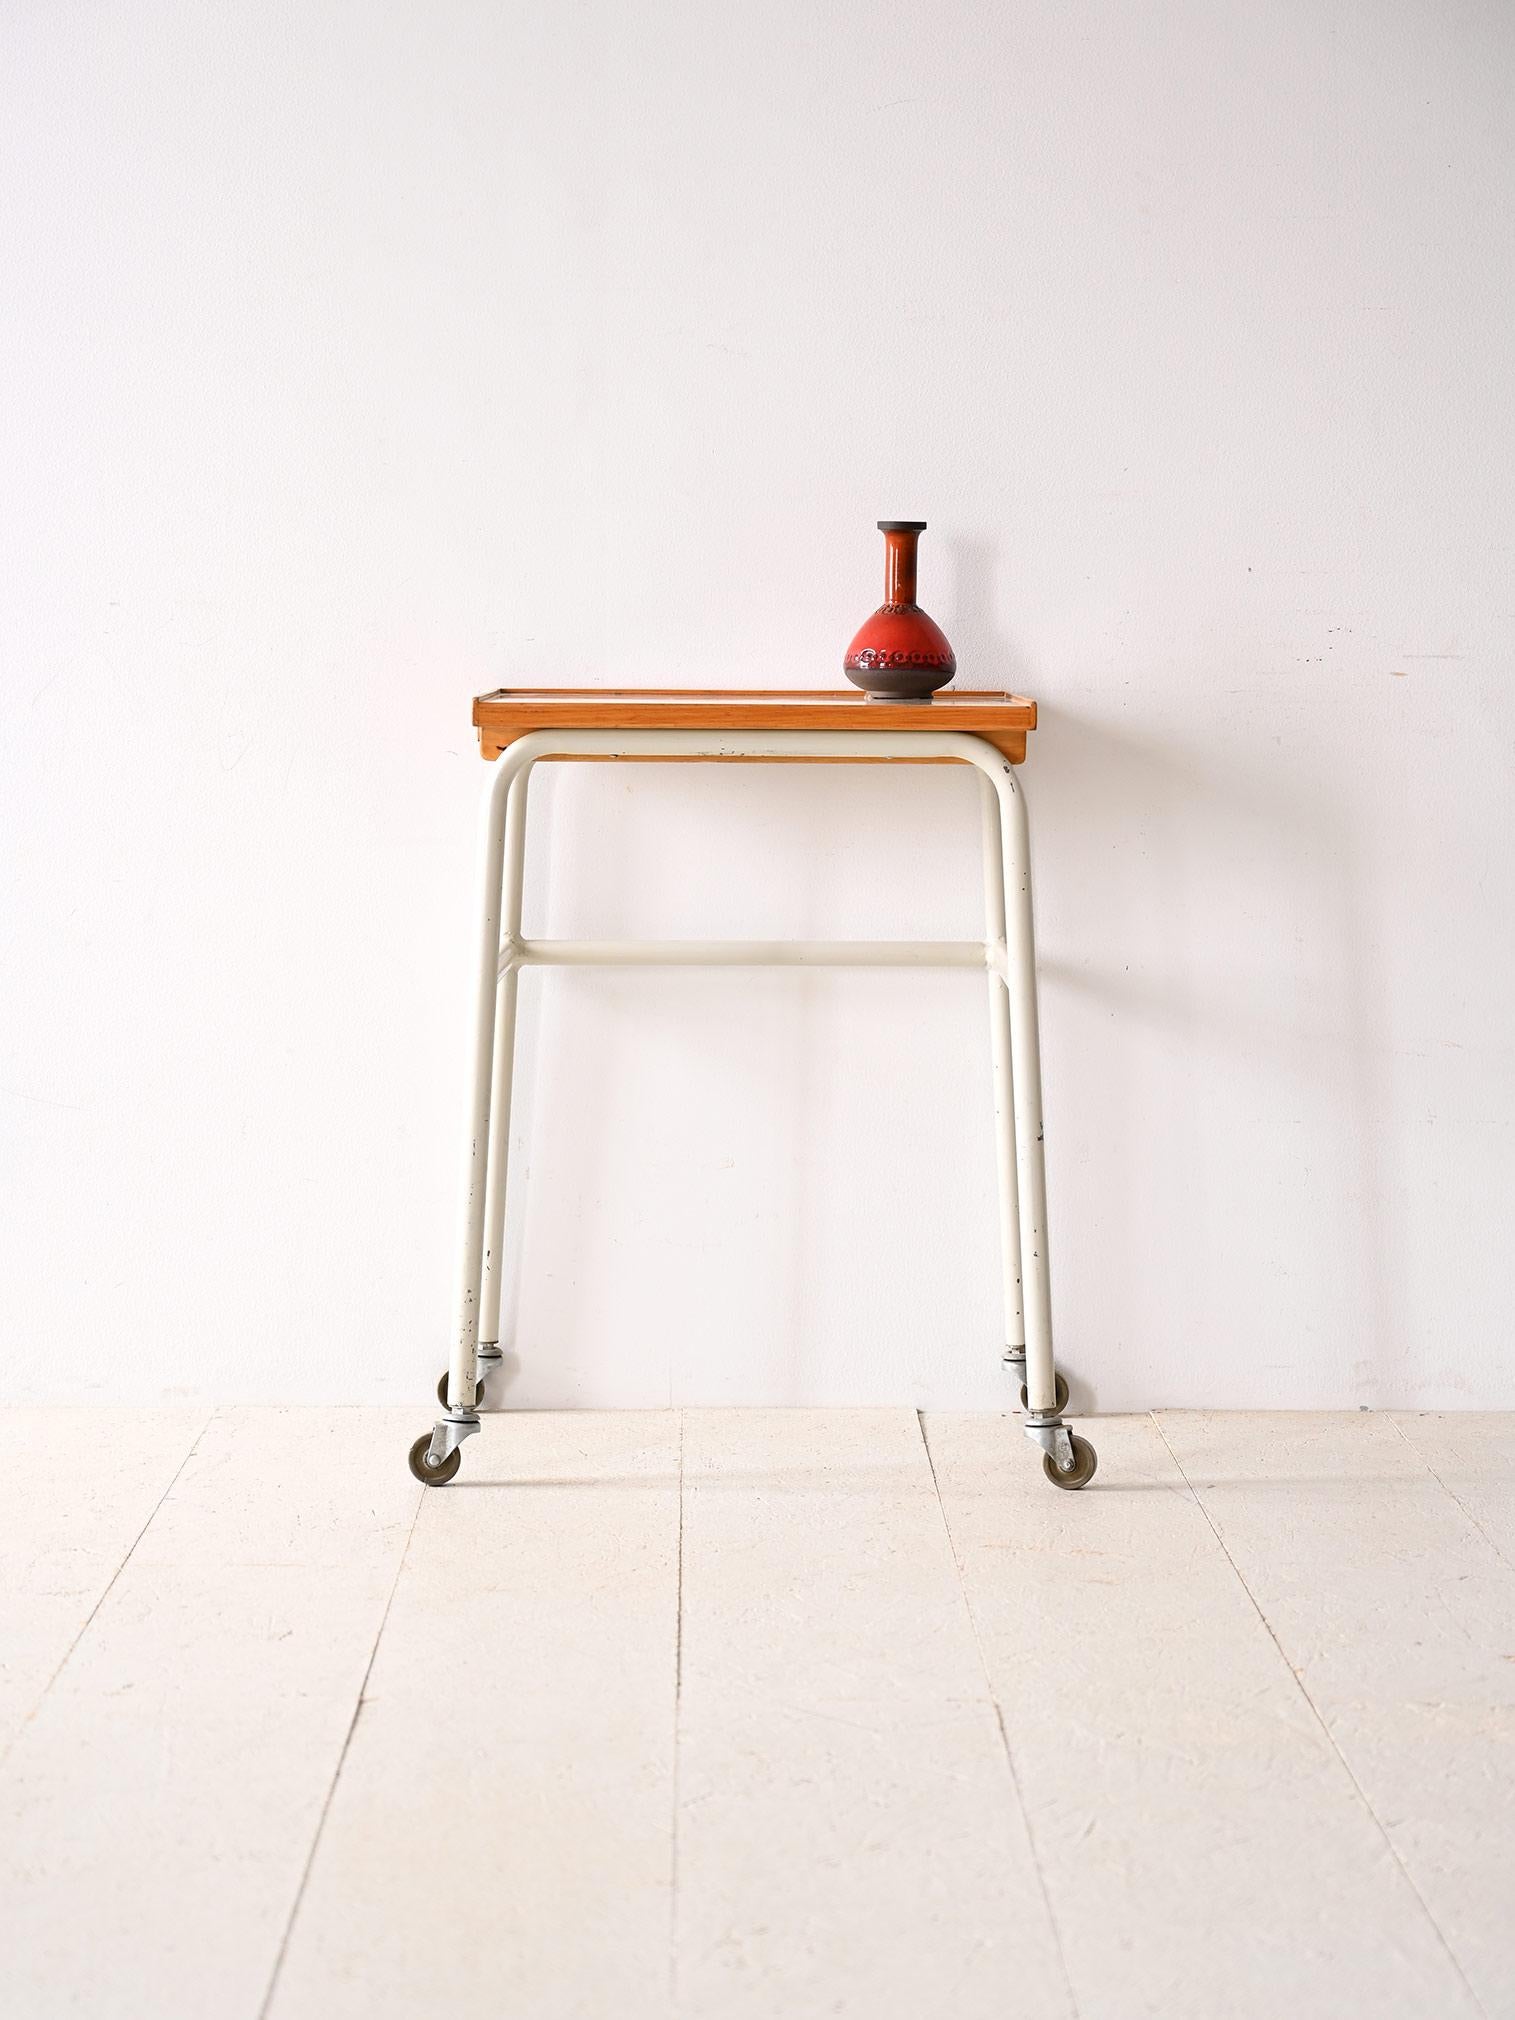 Scandinavian trolley from the 1960s.

A practical and functional piece of modernism due to its small size and the presence 2 of wheels. The understated, industrial style makes it perfect for adding character to any corner of the home. It can be used